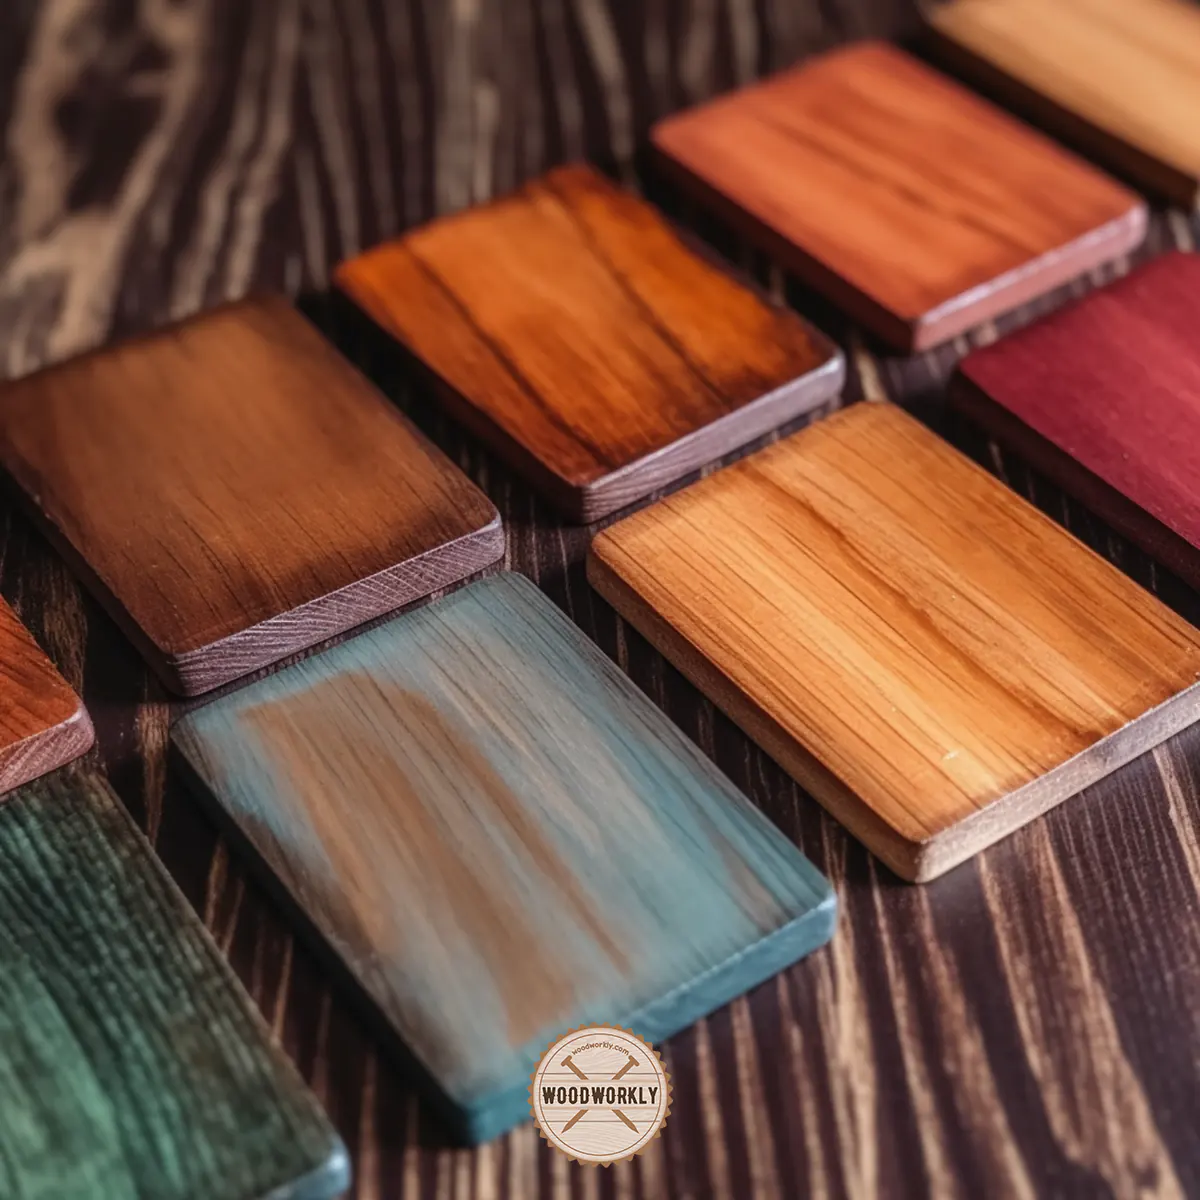 Custom colors made by mixing wood stains